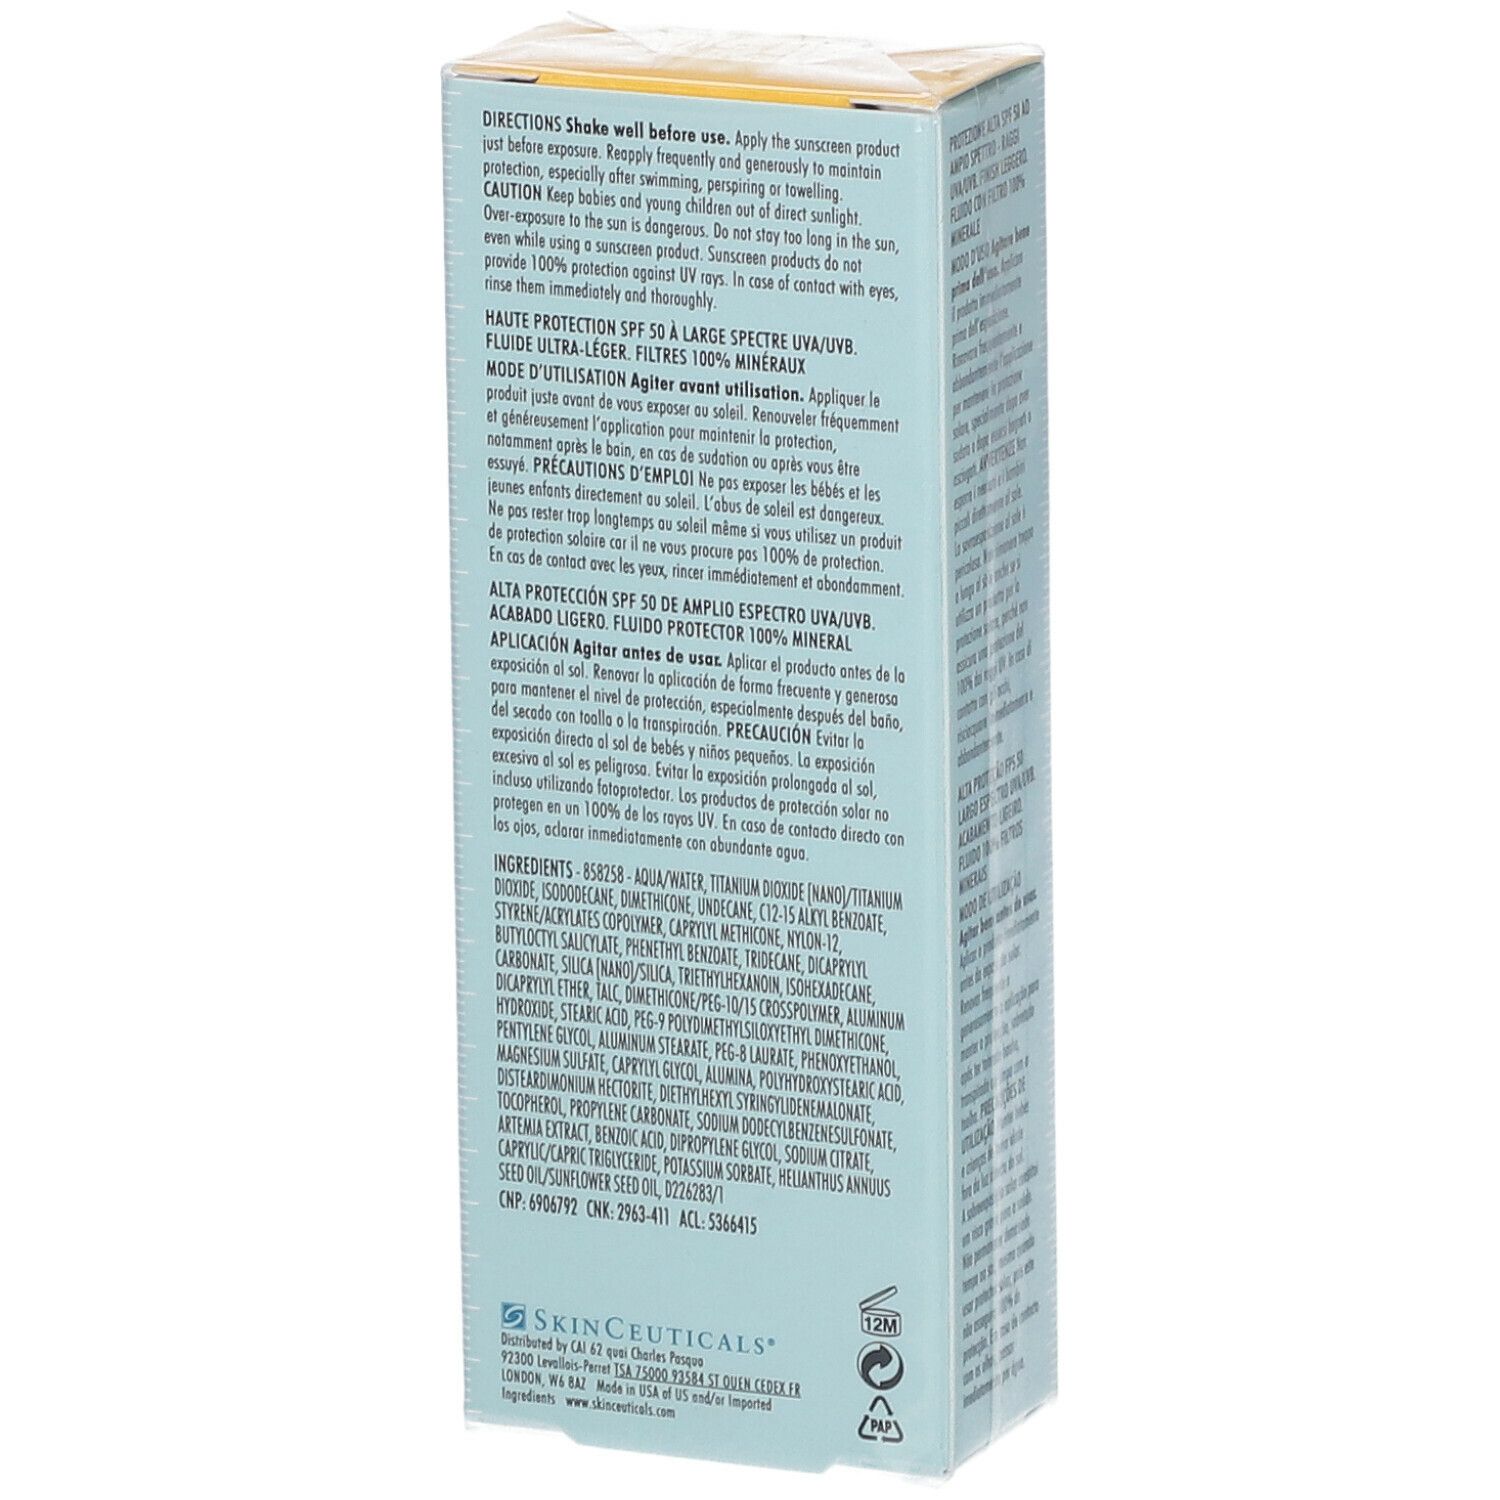 Skinceuticals SHEER MINERAL UV DEFENSE SPF 50 Protection solaire visage minérale SPF 50 50ml